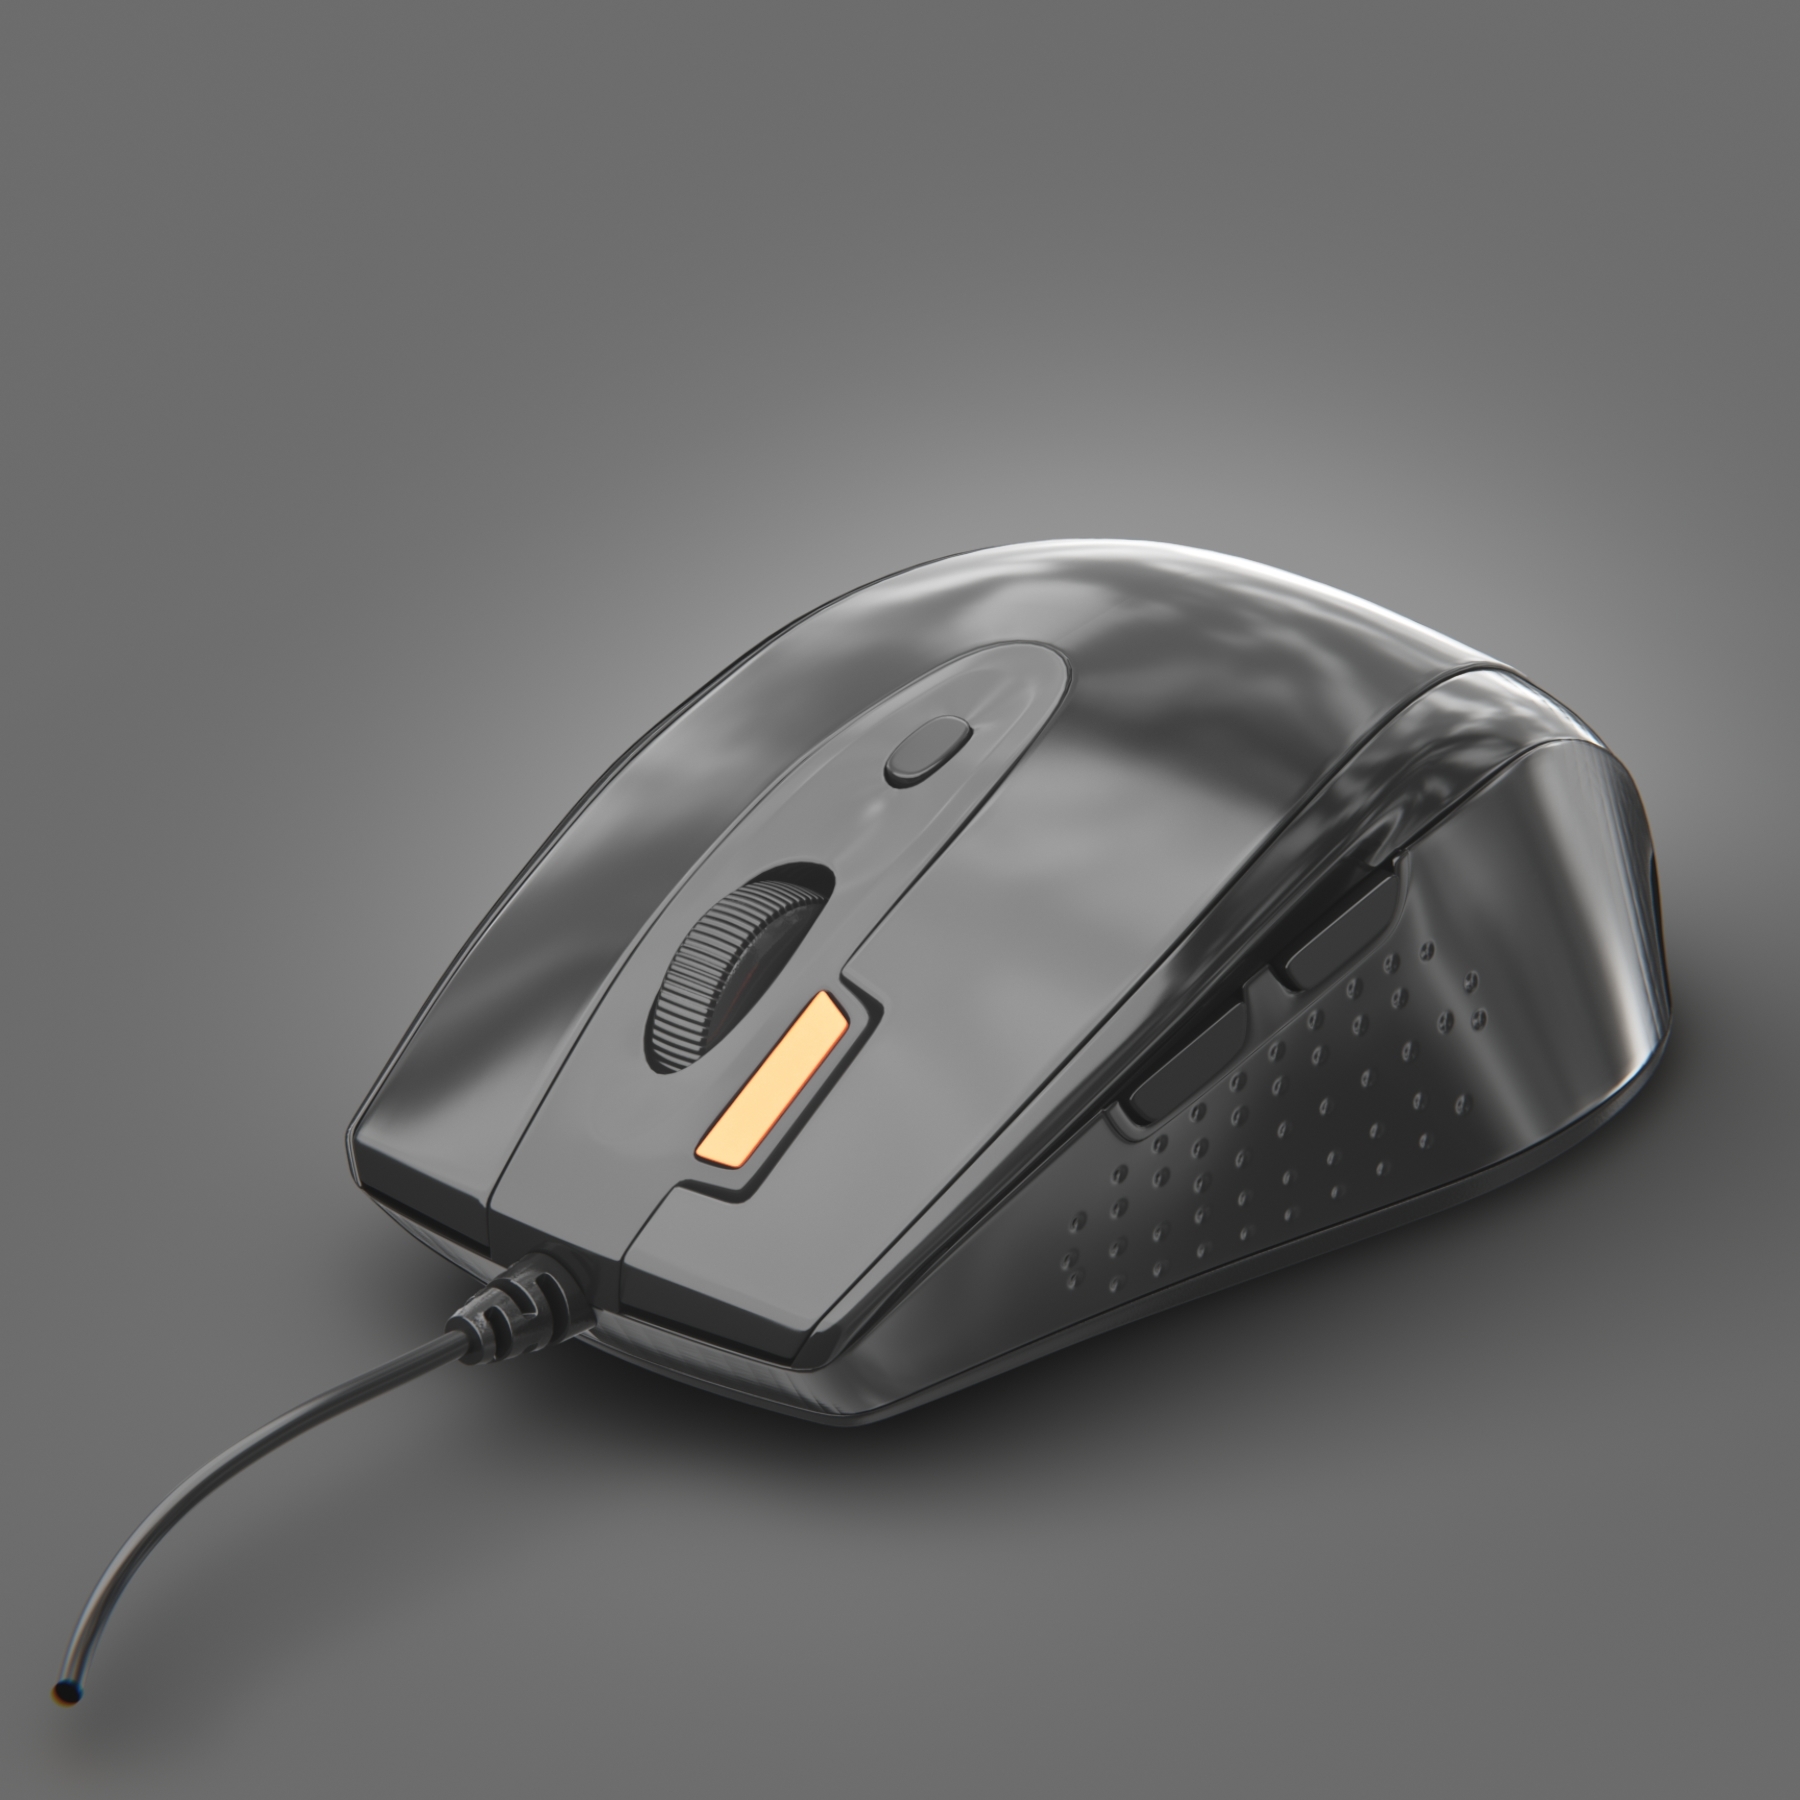 3d model of mouse computer